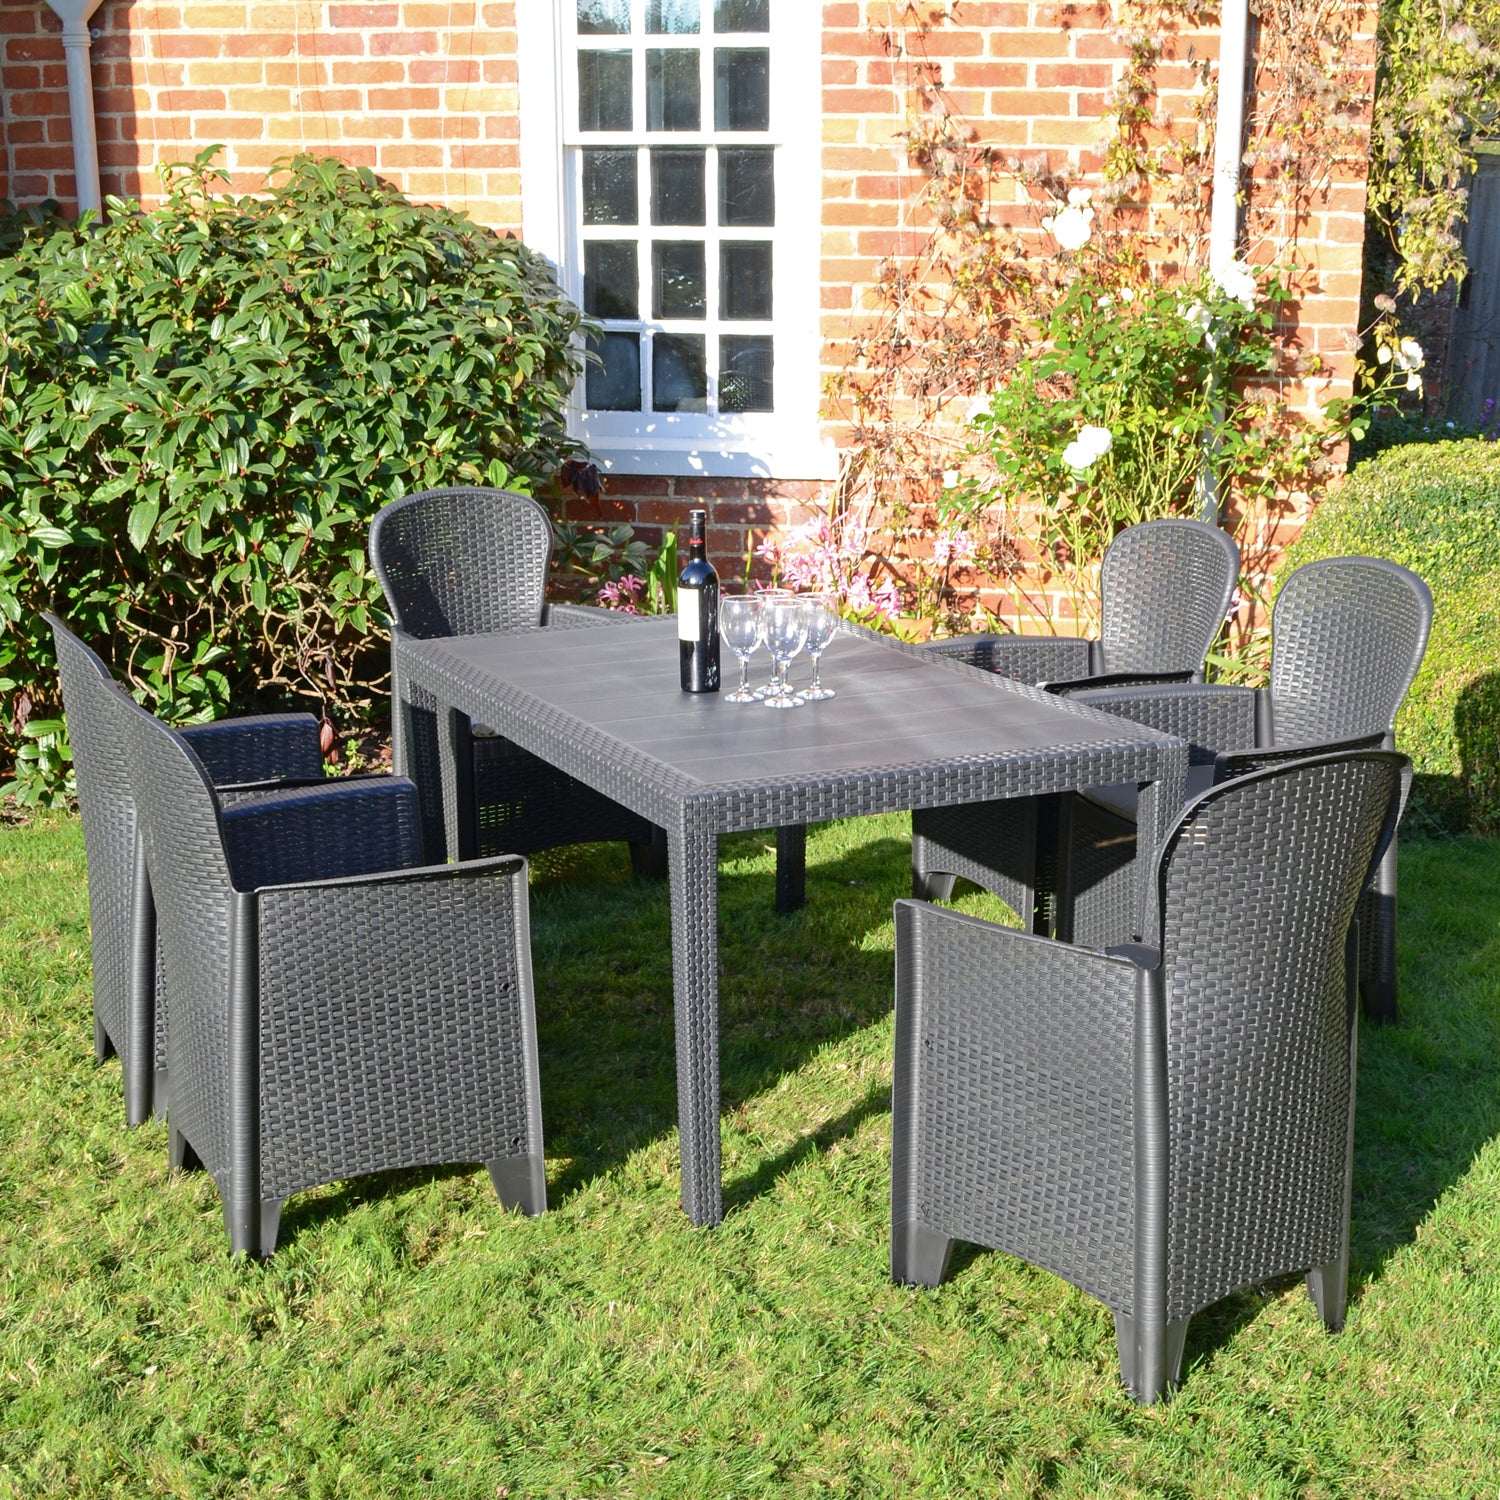 Trabella Salerno Dining Table with 6 Sicily Chairs Patio Set Anthracite Dining Sets Trabella   